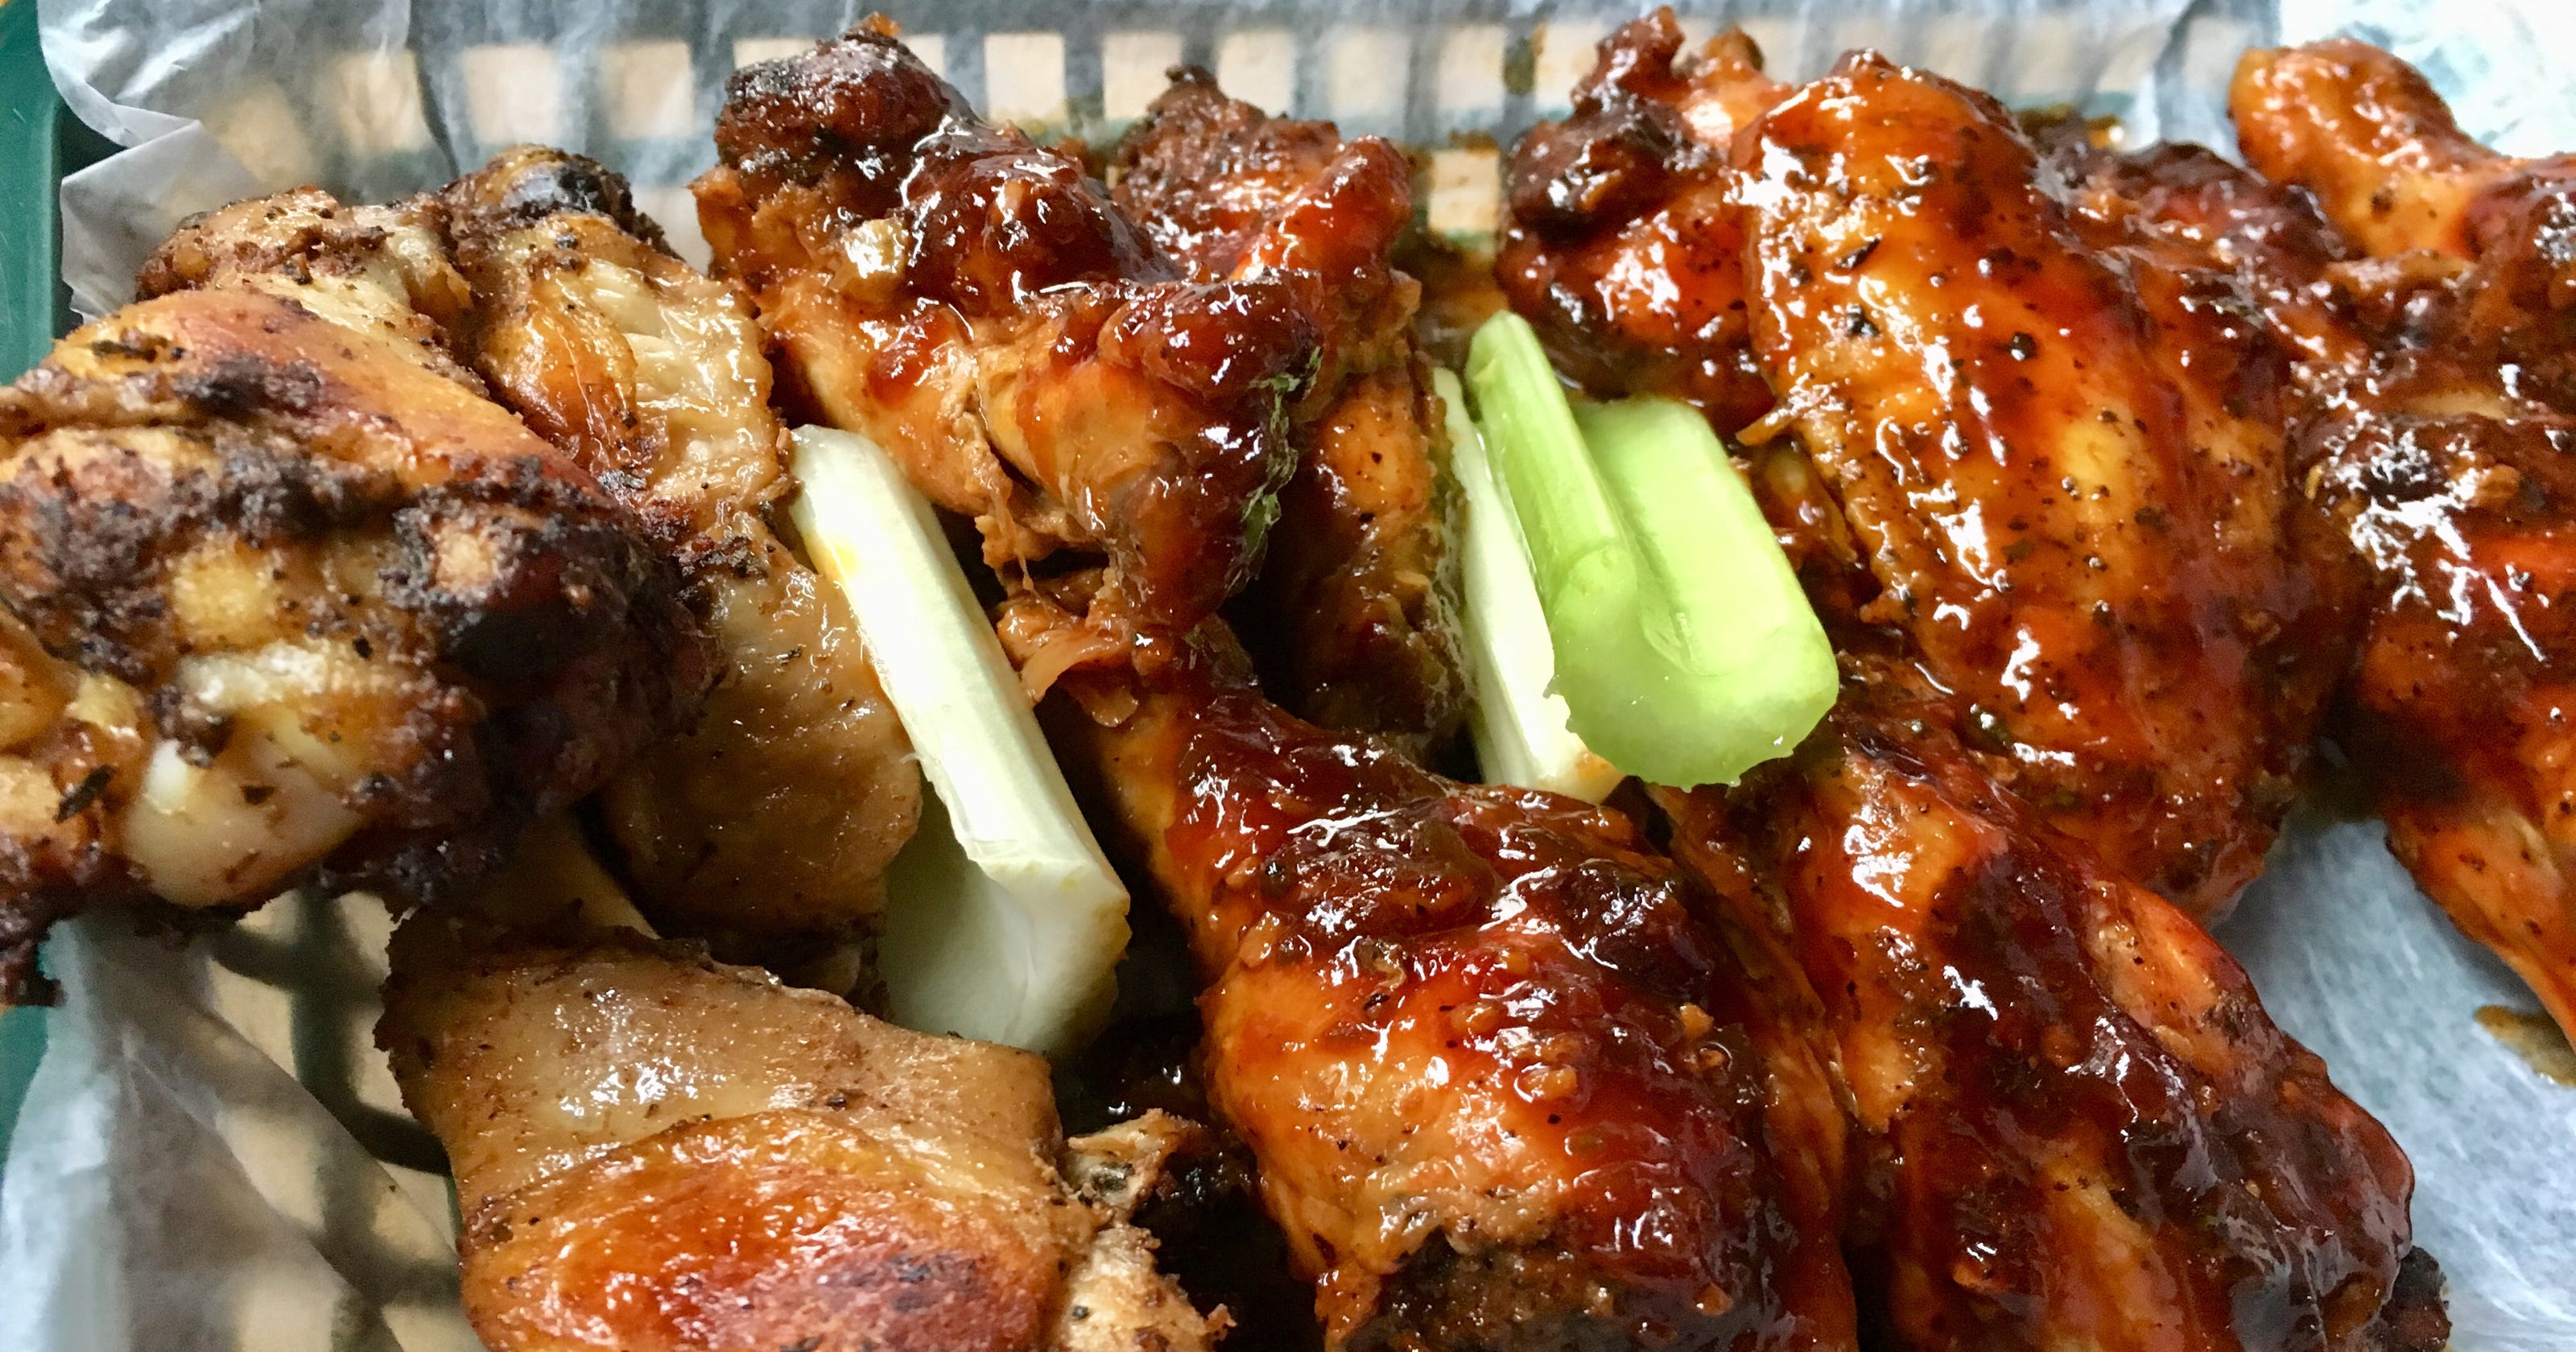 Top 5 places to get chicken wings in Nashville